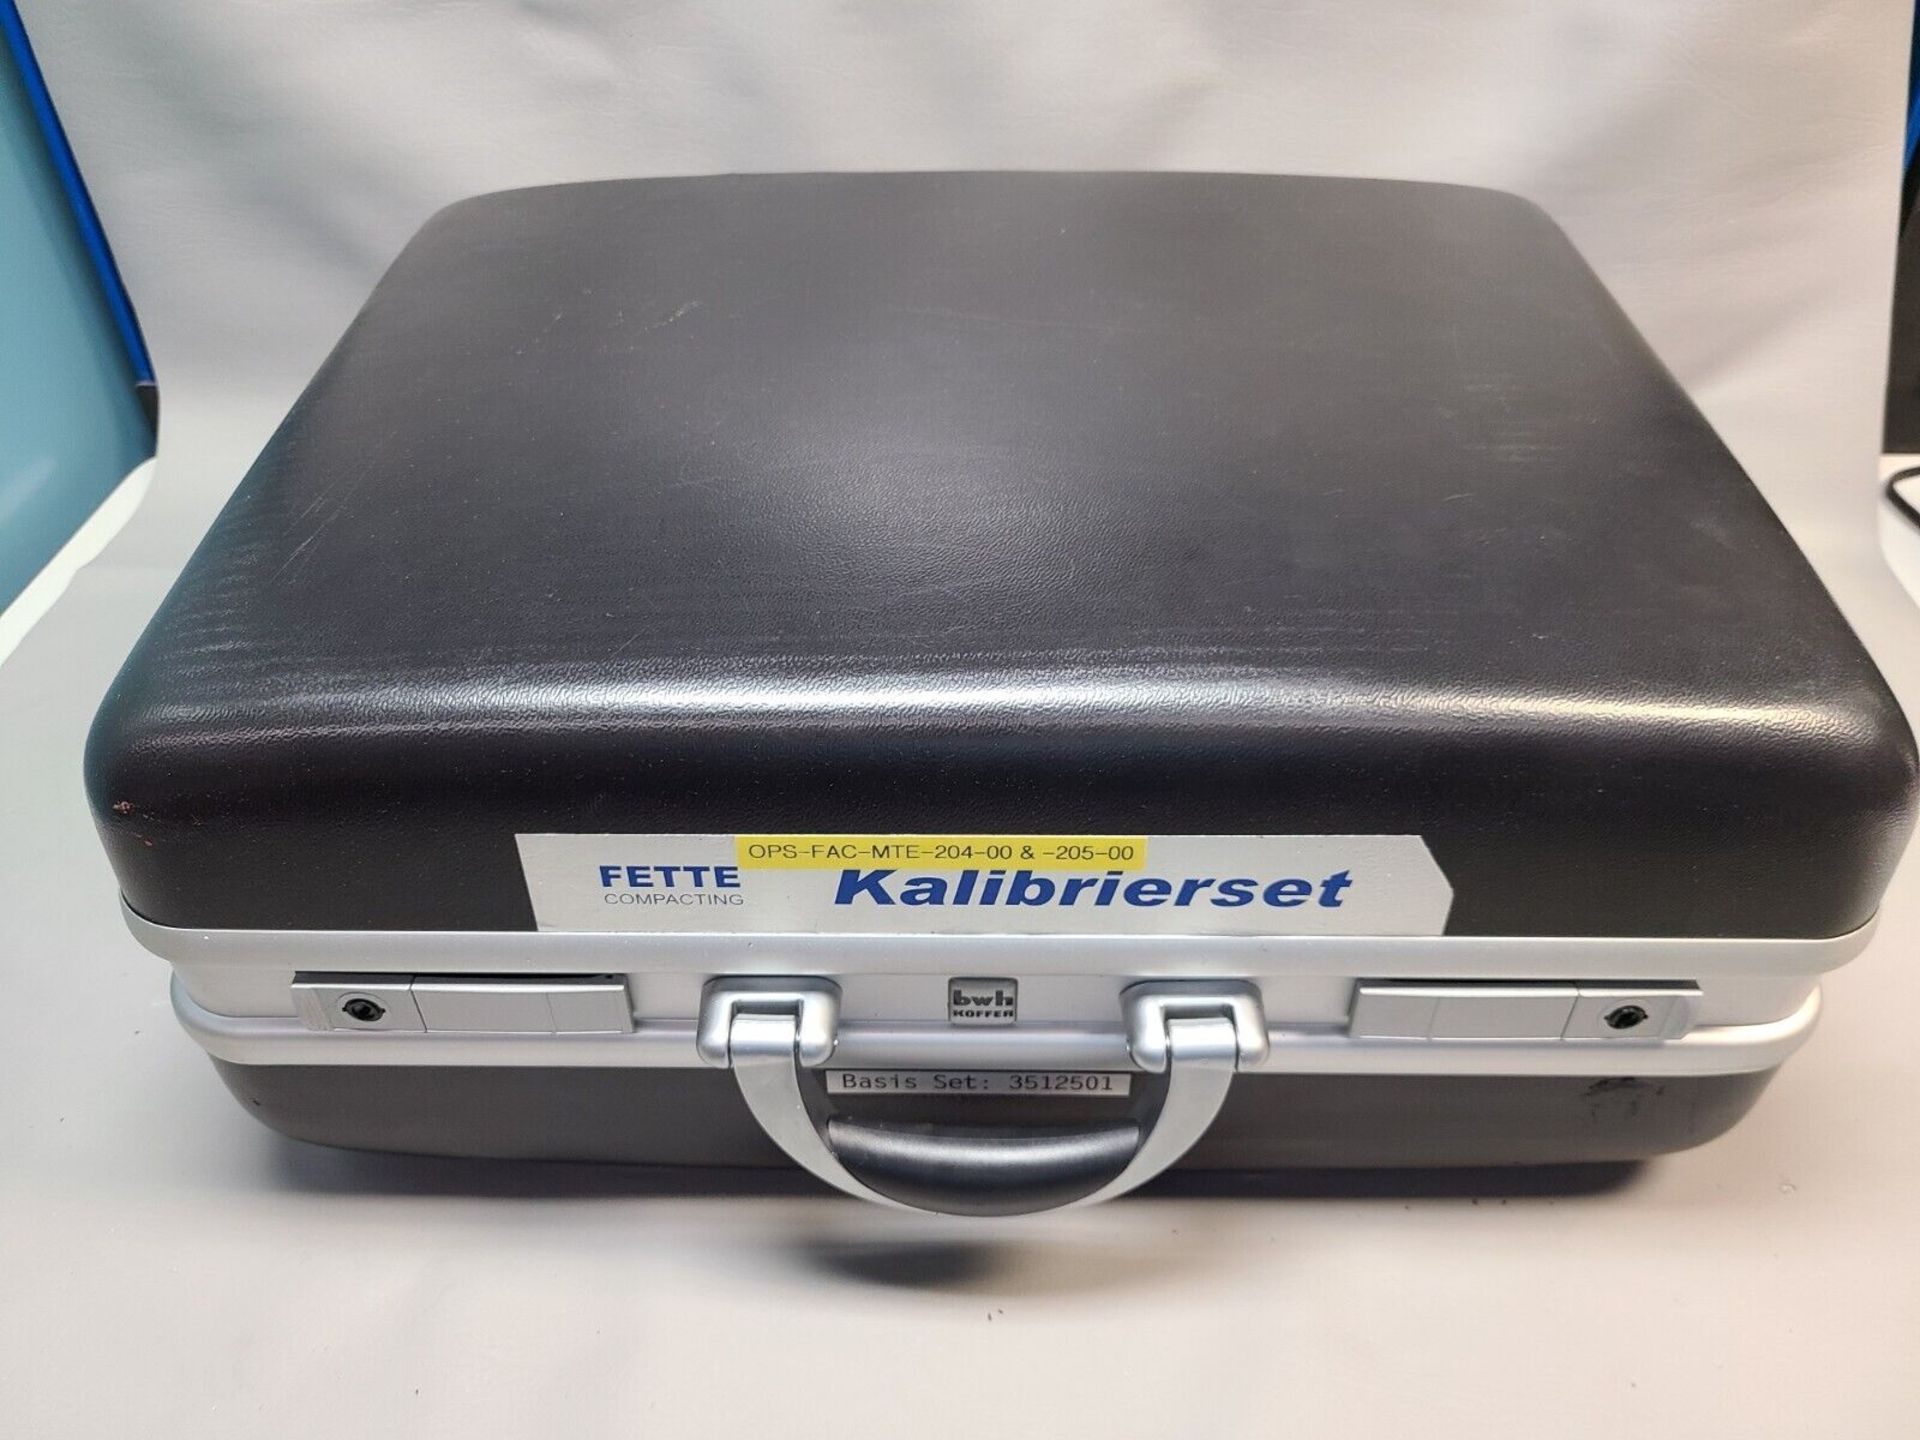 HOTTINGER BALDWIN MOBILE CARRIER FREQUENCY ANALYZER